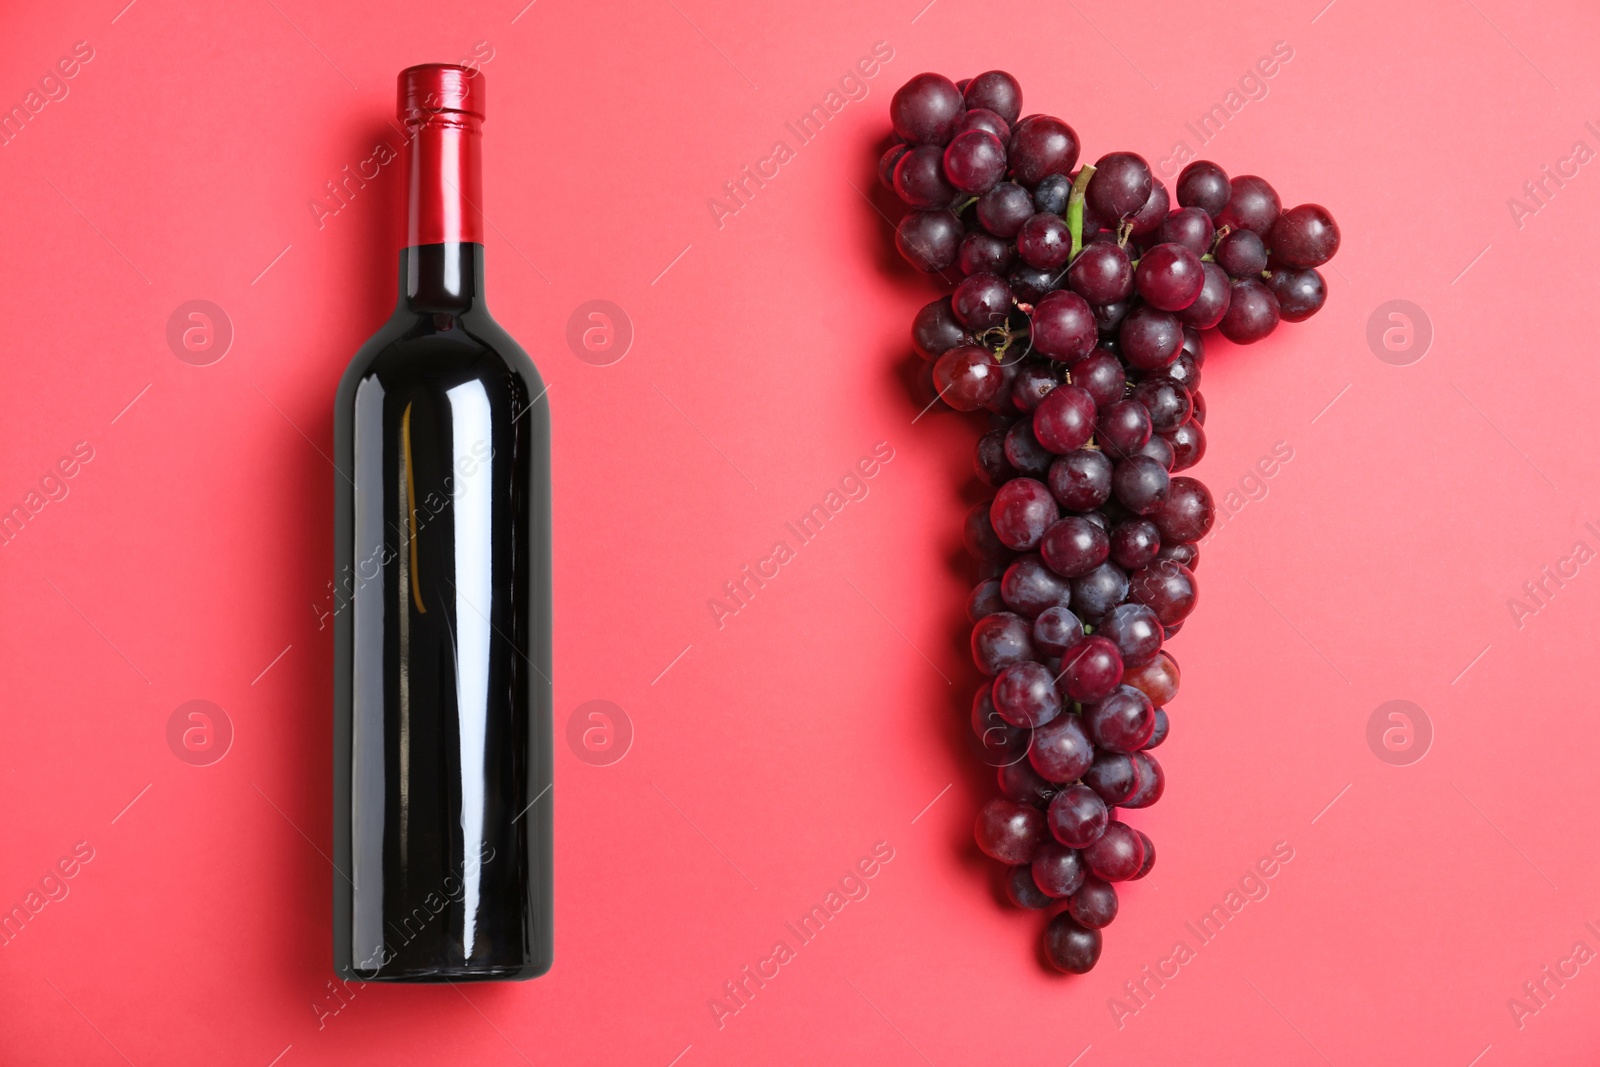 Photo of Fresh ripe juicy grapes and bottle of wine on red background, flat lay